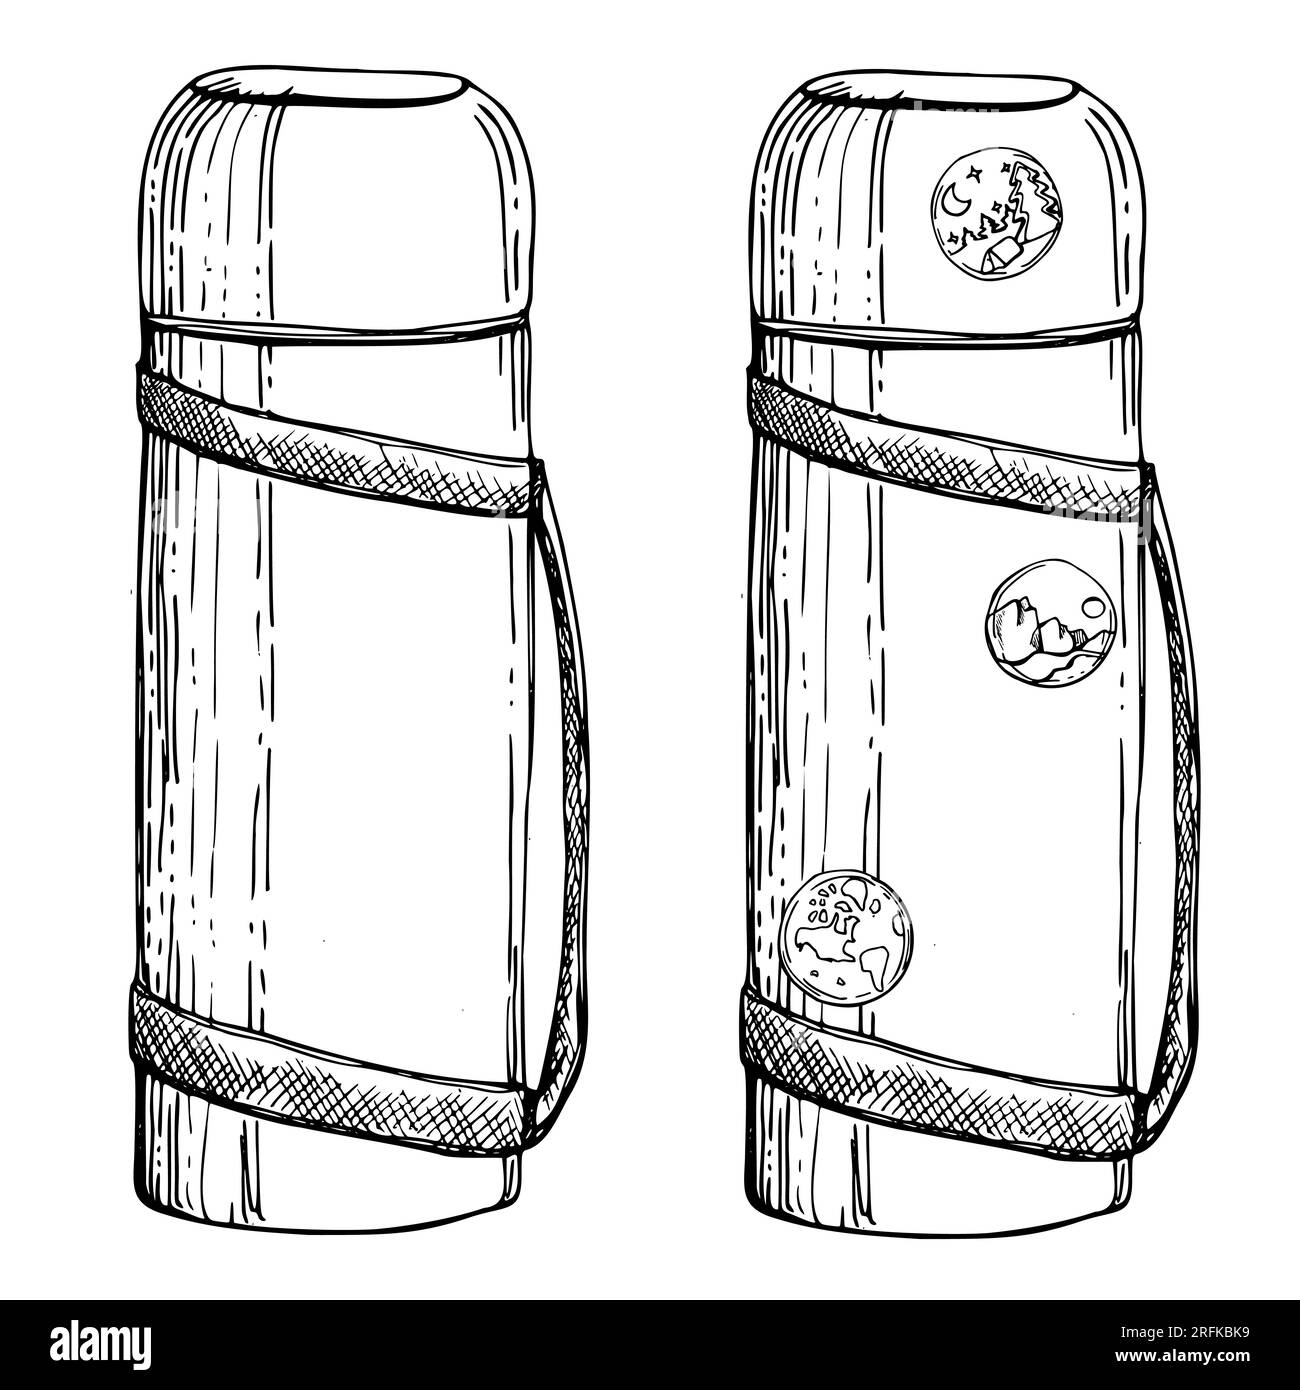 https://c8.alamy.com/comp/2RFKBK9/ink-hand-drawn-vector-graphic-sketch-of-isolated-object-travel-accessory-for-tourist-vacuum-flask-with-stickers-and-pins-design-for-tourism-travel-2RFKBK9.jpg